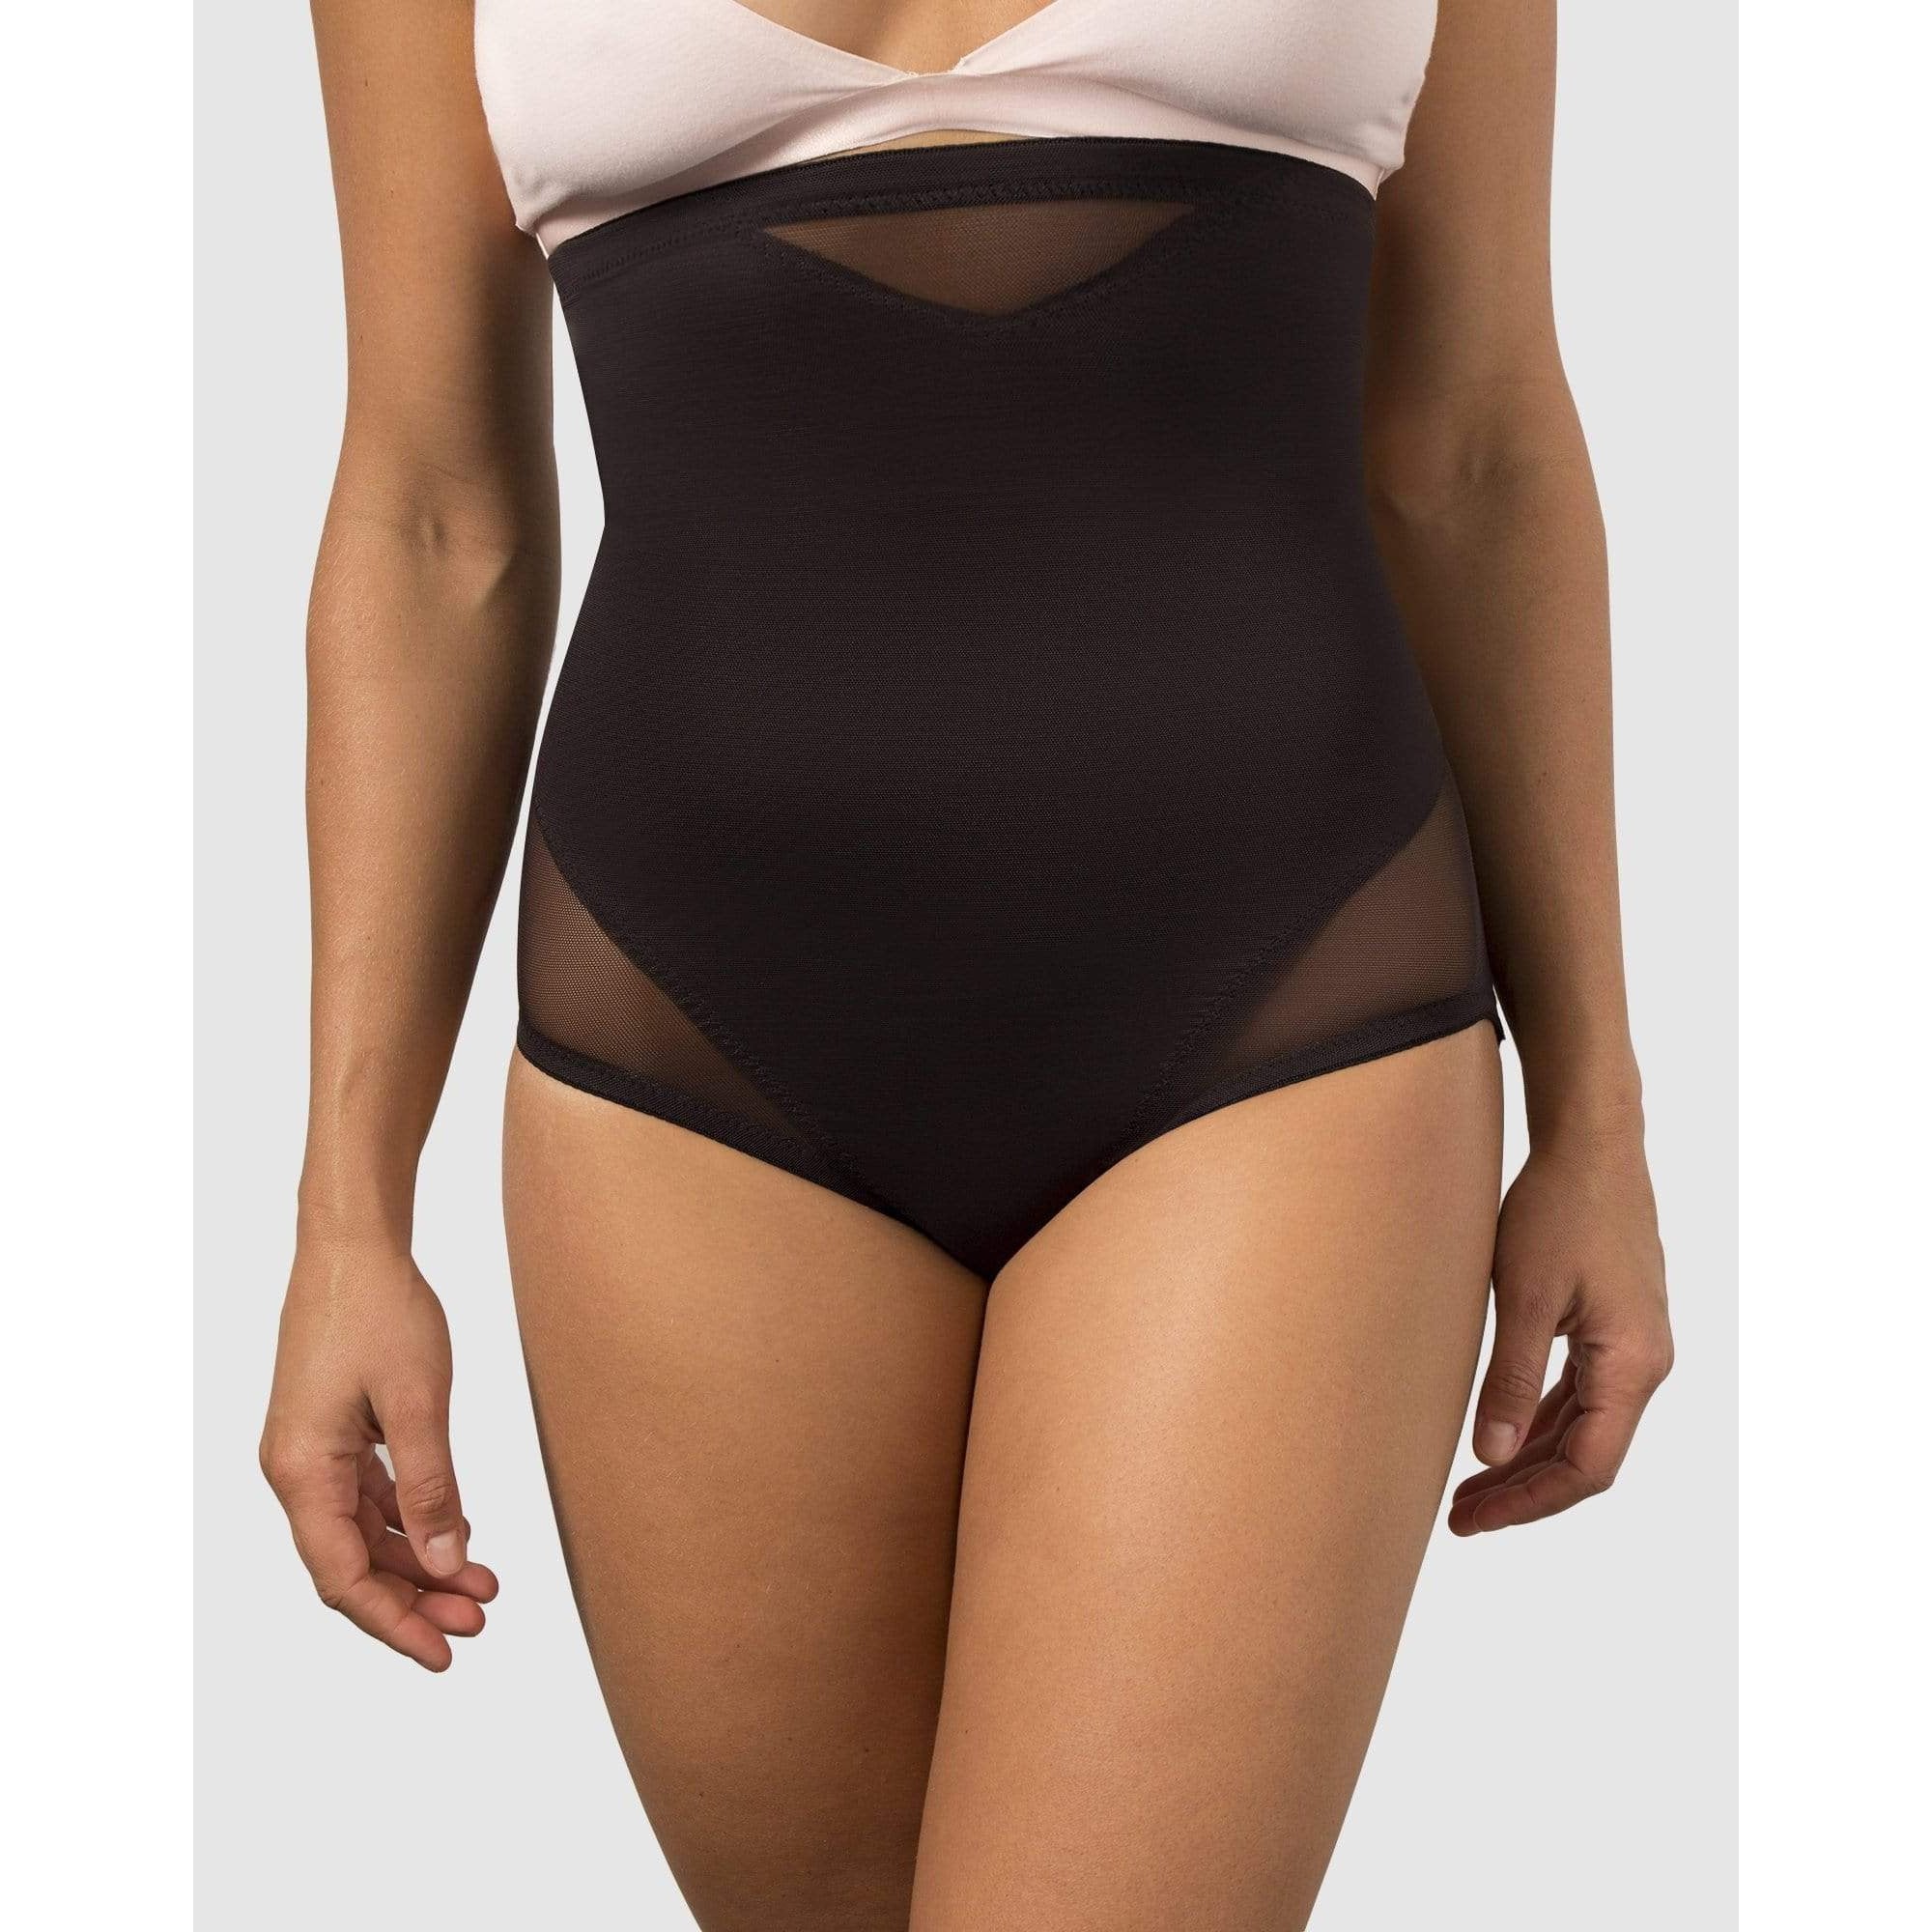 Miraclesuit Shapewear Surround Support Shaping Hi Waist Brief from Illusions Lingerie in Melbourne